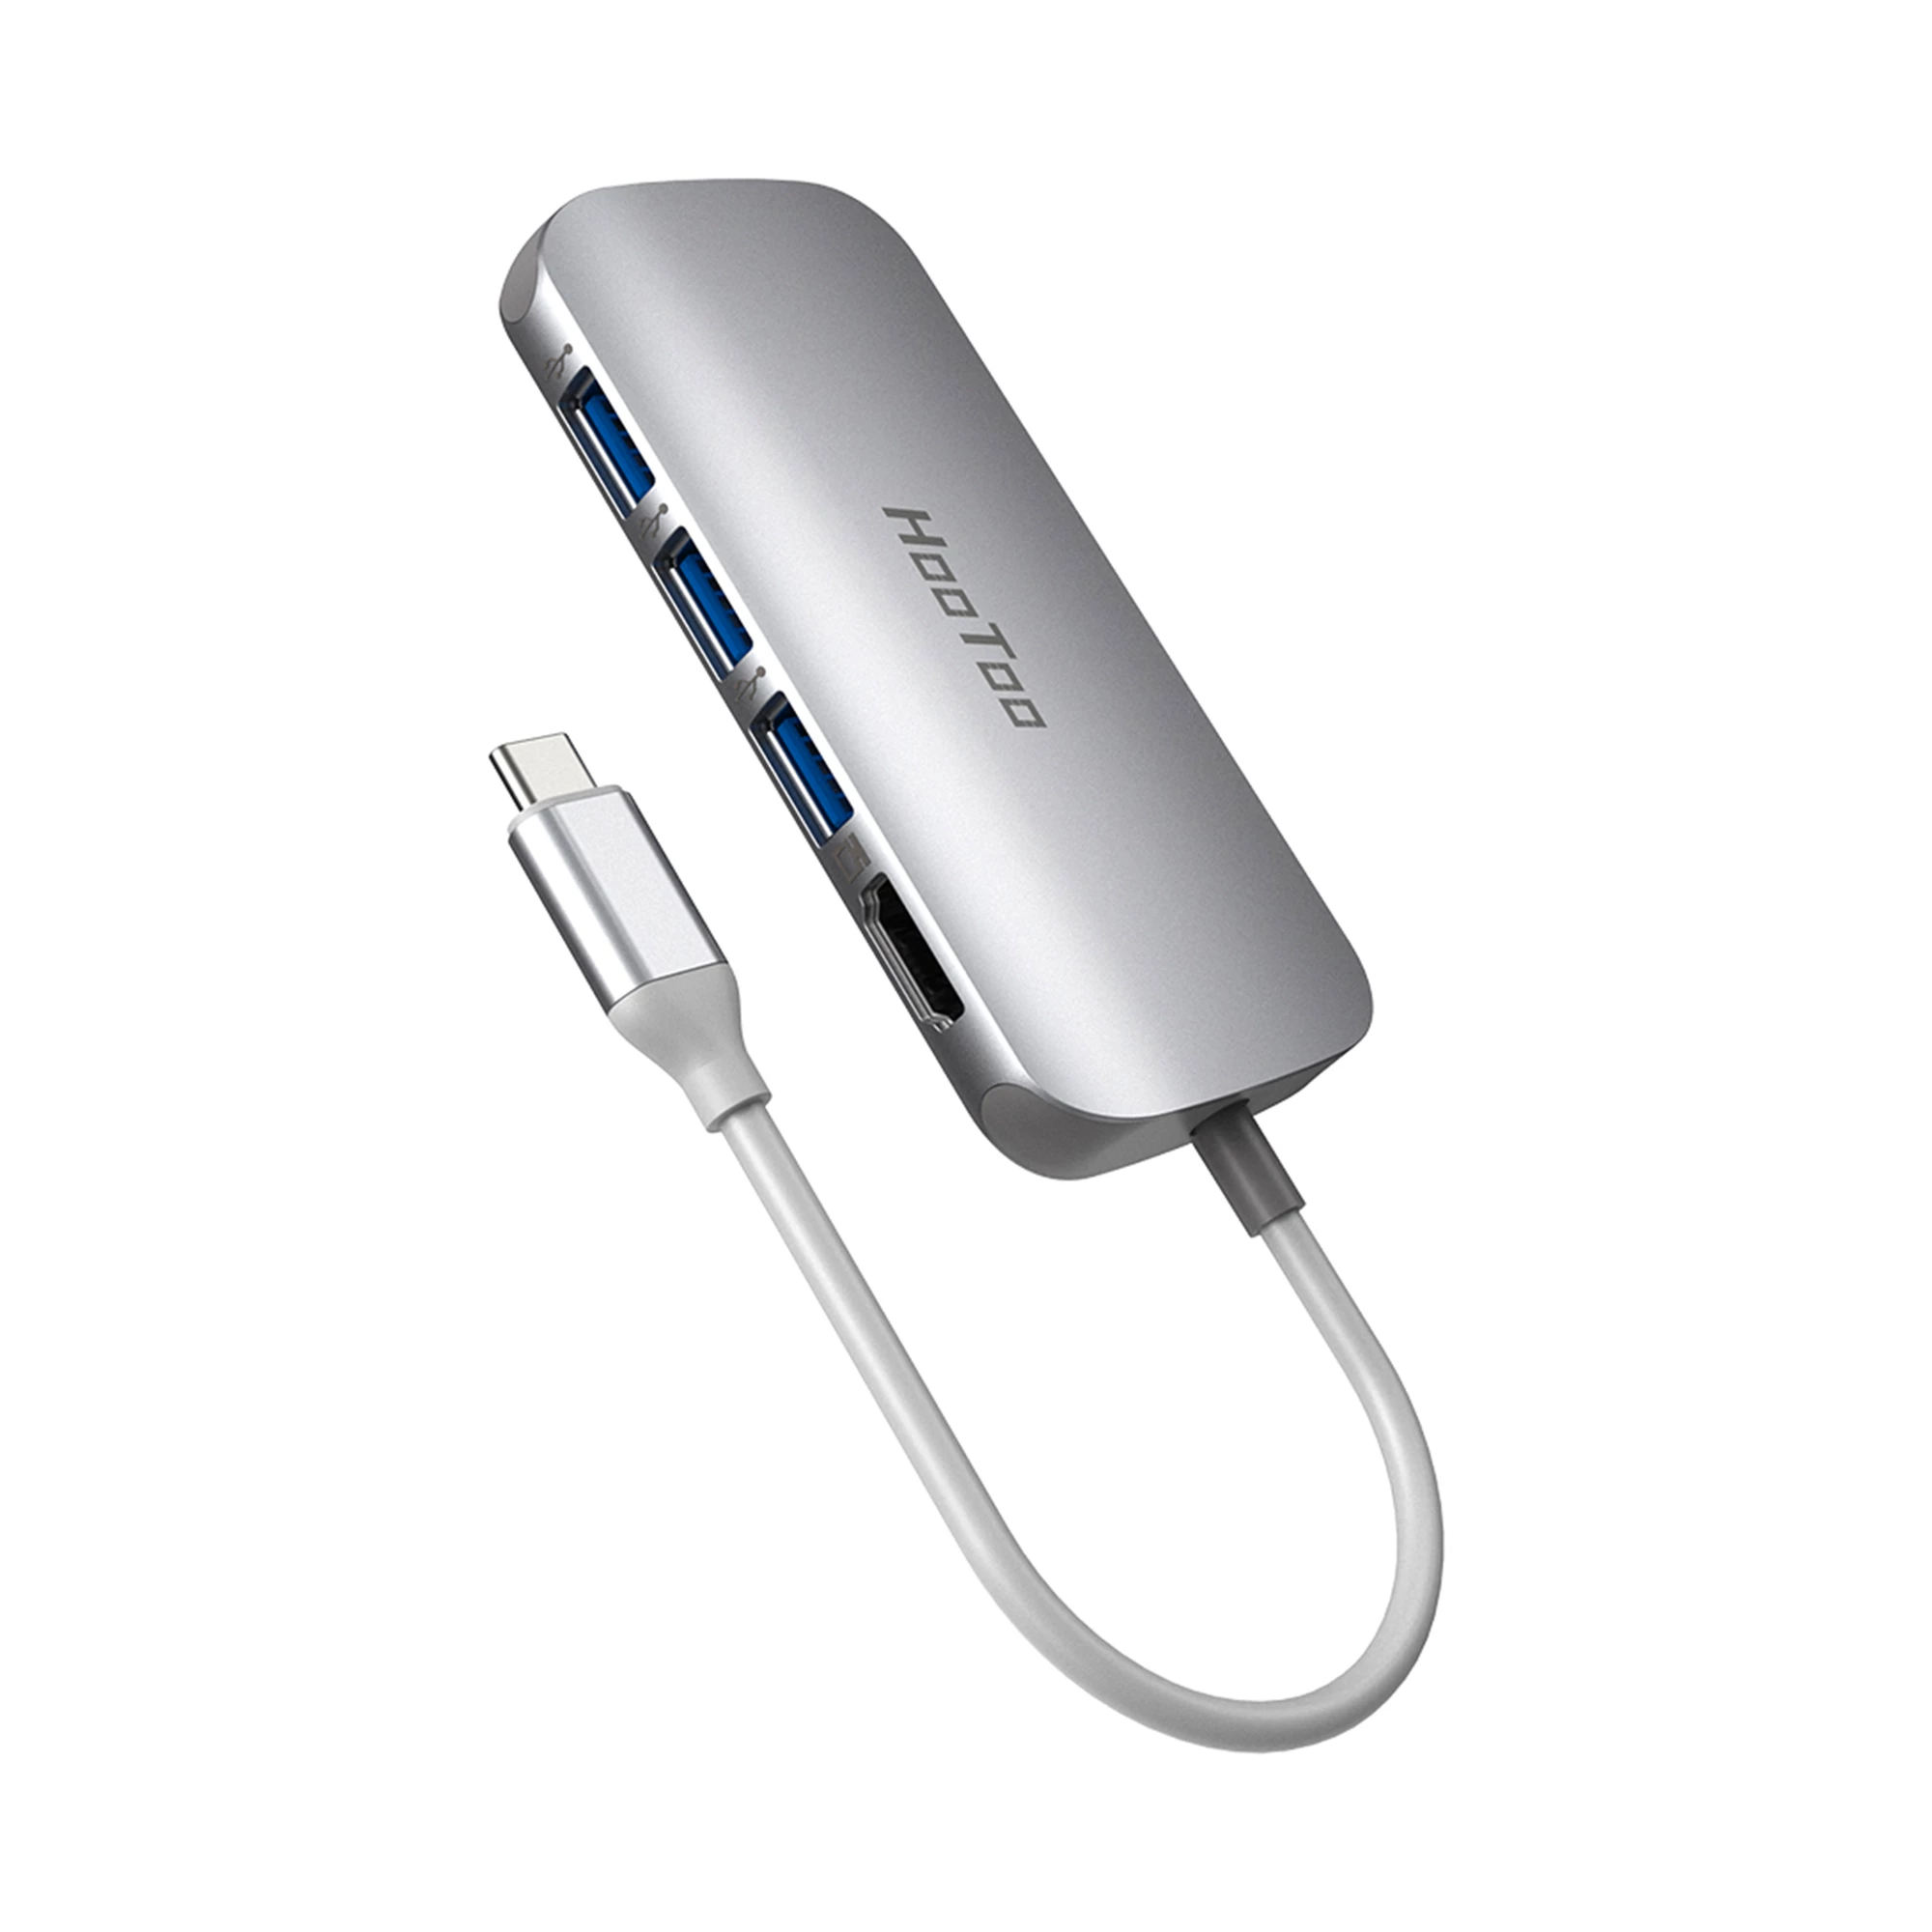 USB-хаб HooToo USB C Hub 7-in-1 Adapter with Ethernet Port Silver (HT-UC008)